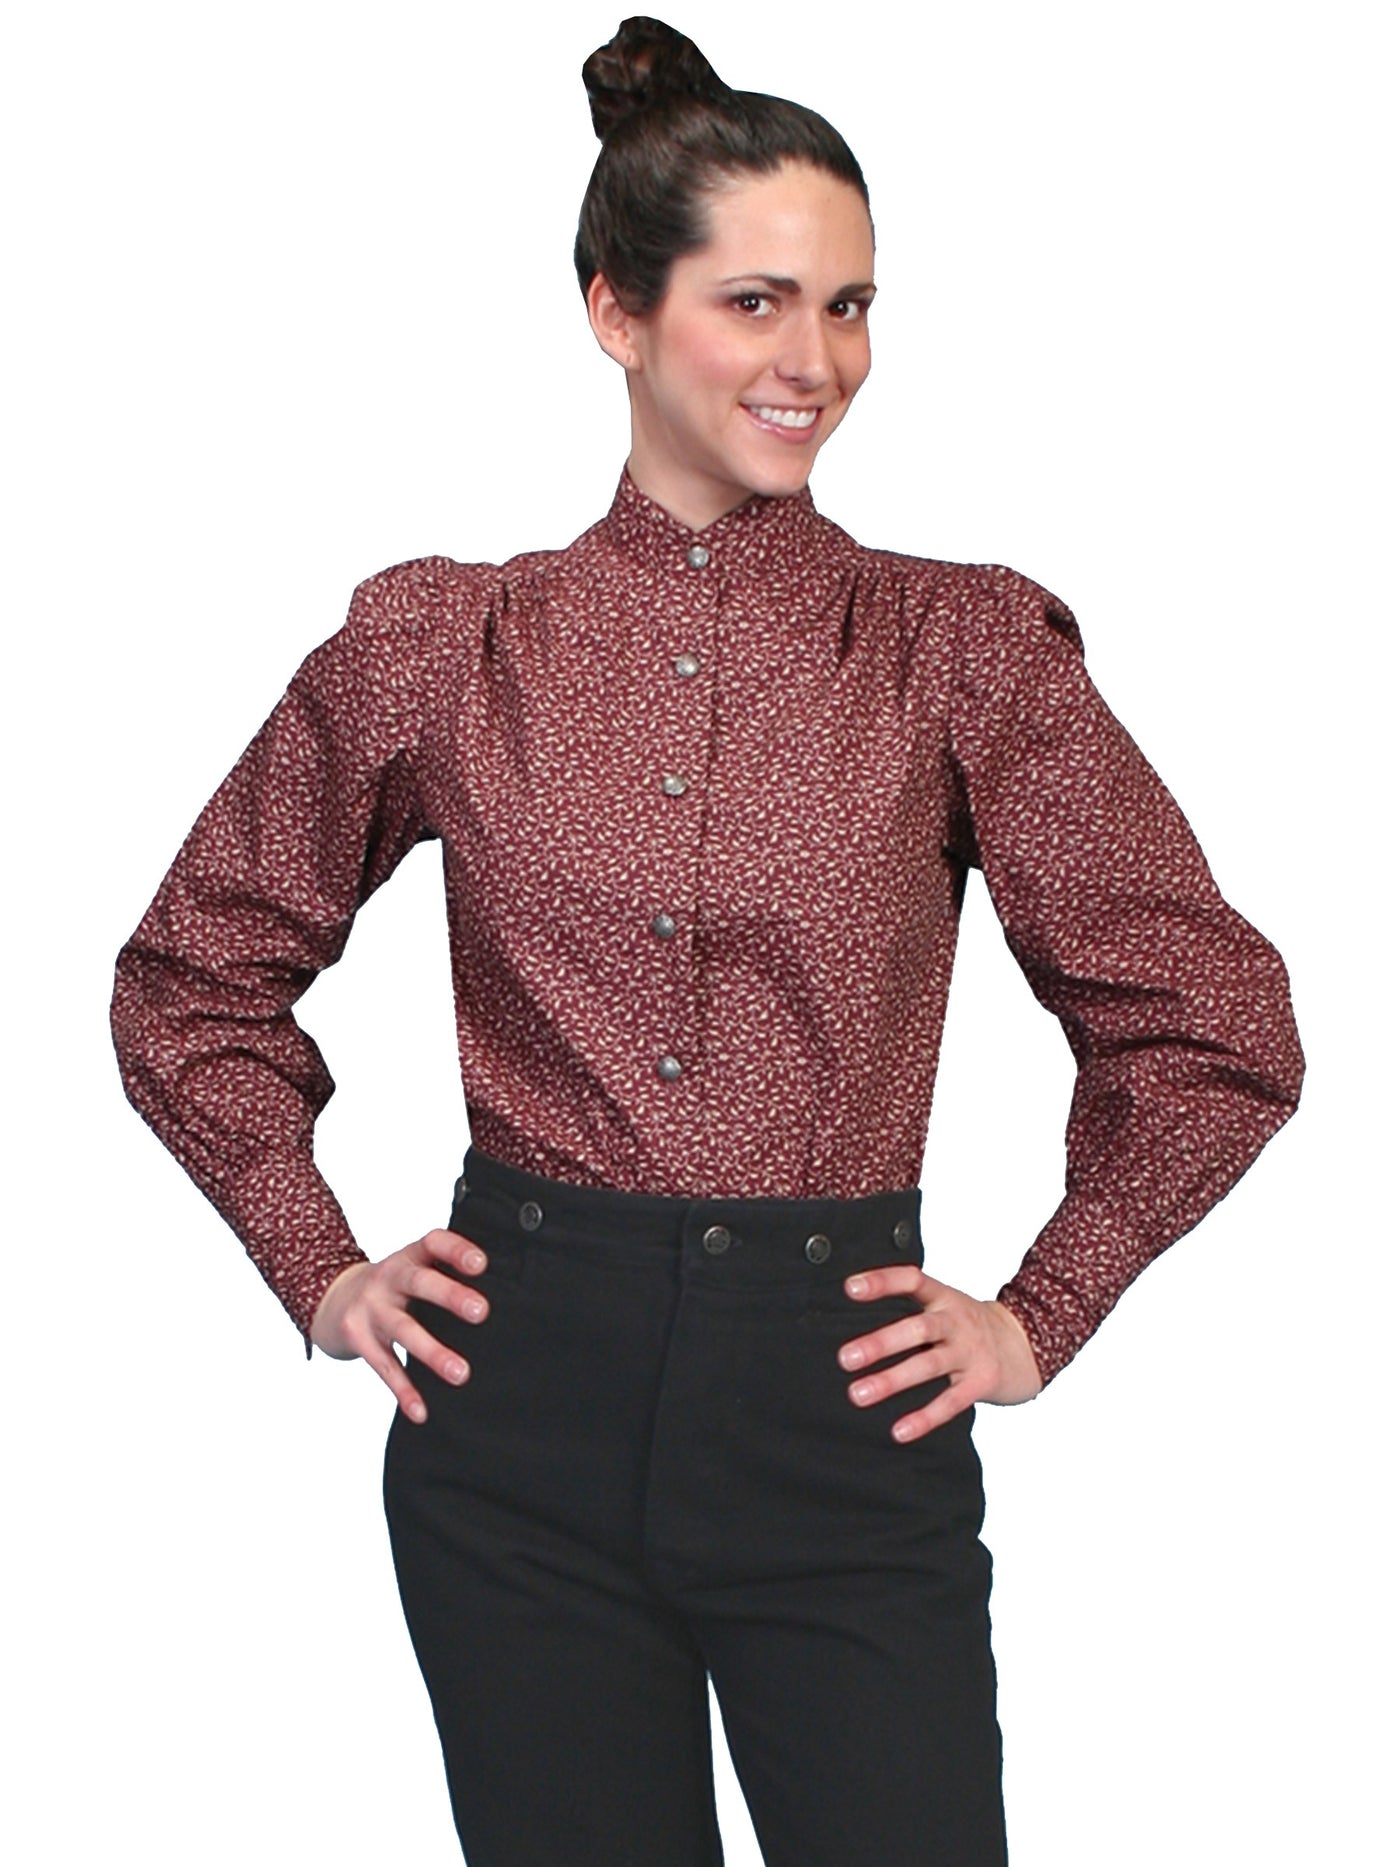 Ranch Style Floral Blouse in Burgundy - SOLD OUT